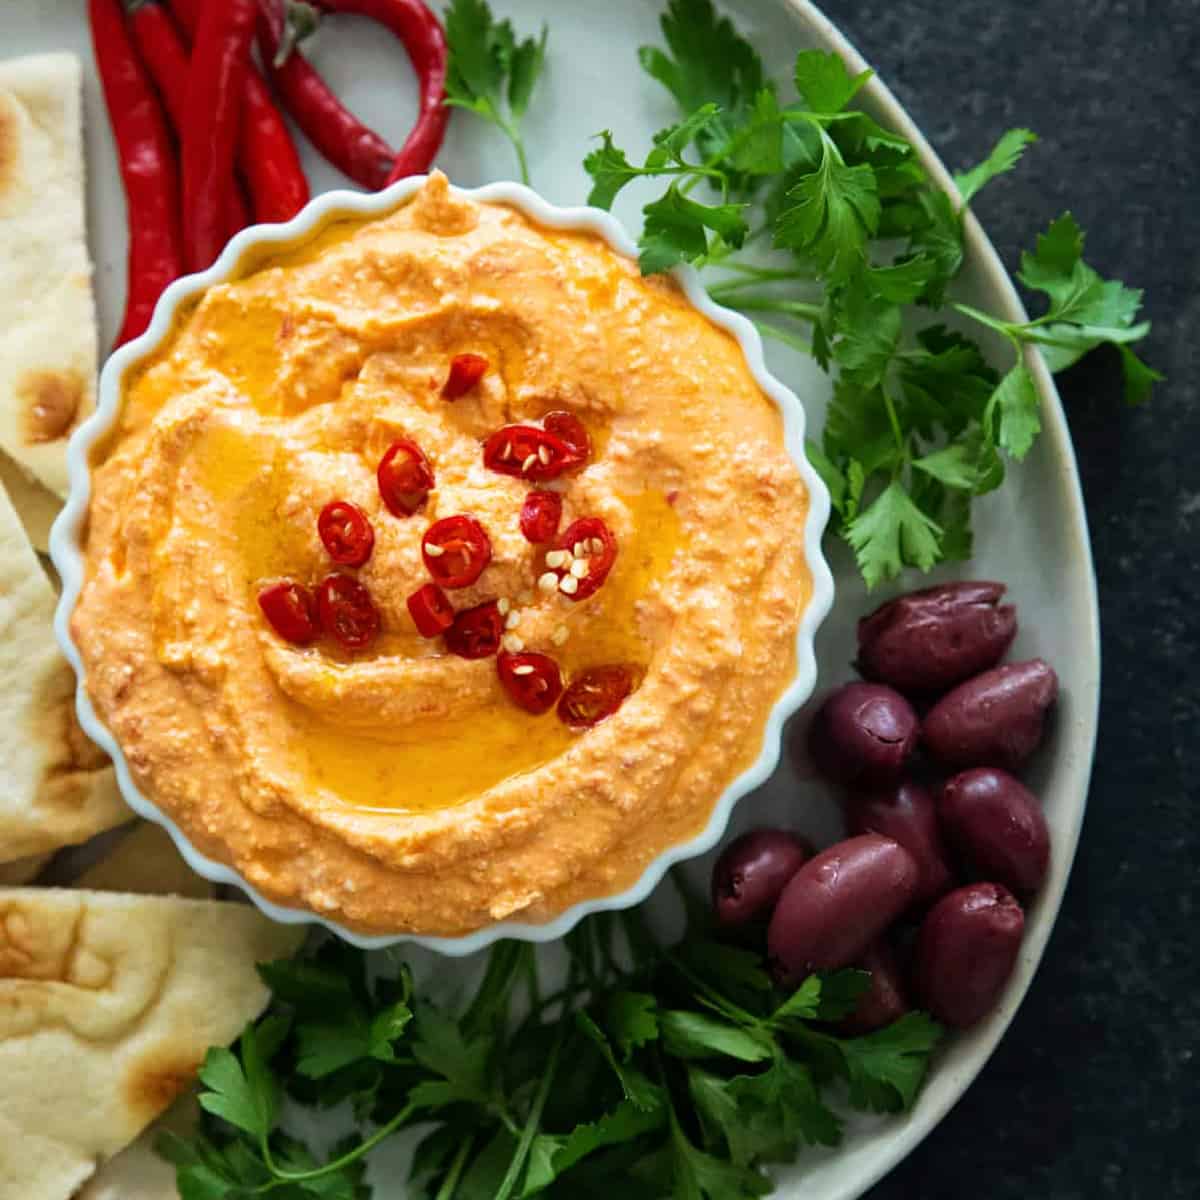 Tirokafteri is a classic spicy Greek feta dip that's ready in 5 minutes. Made with creamy feta and roasted red peppers, you can enjoy this dip as part of a mezze platter with some pita bread.
